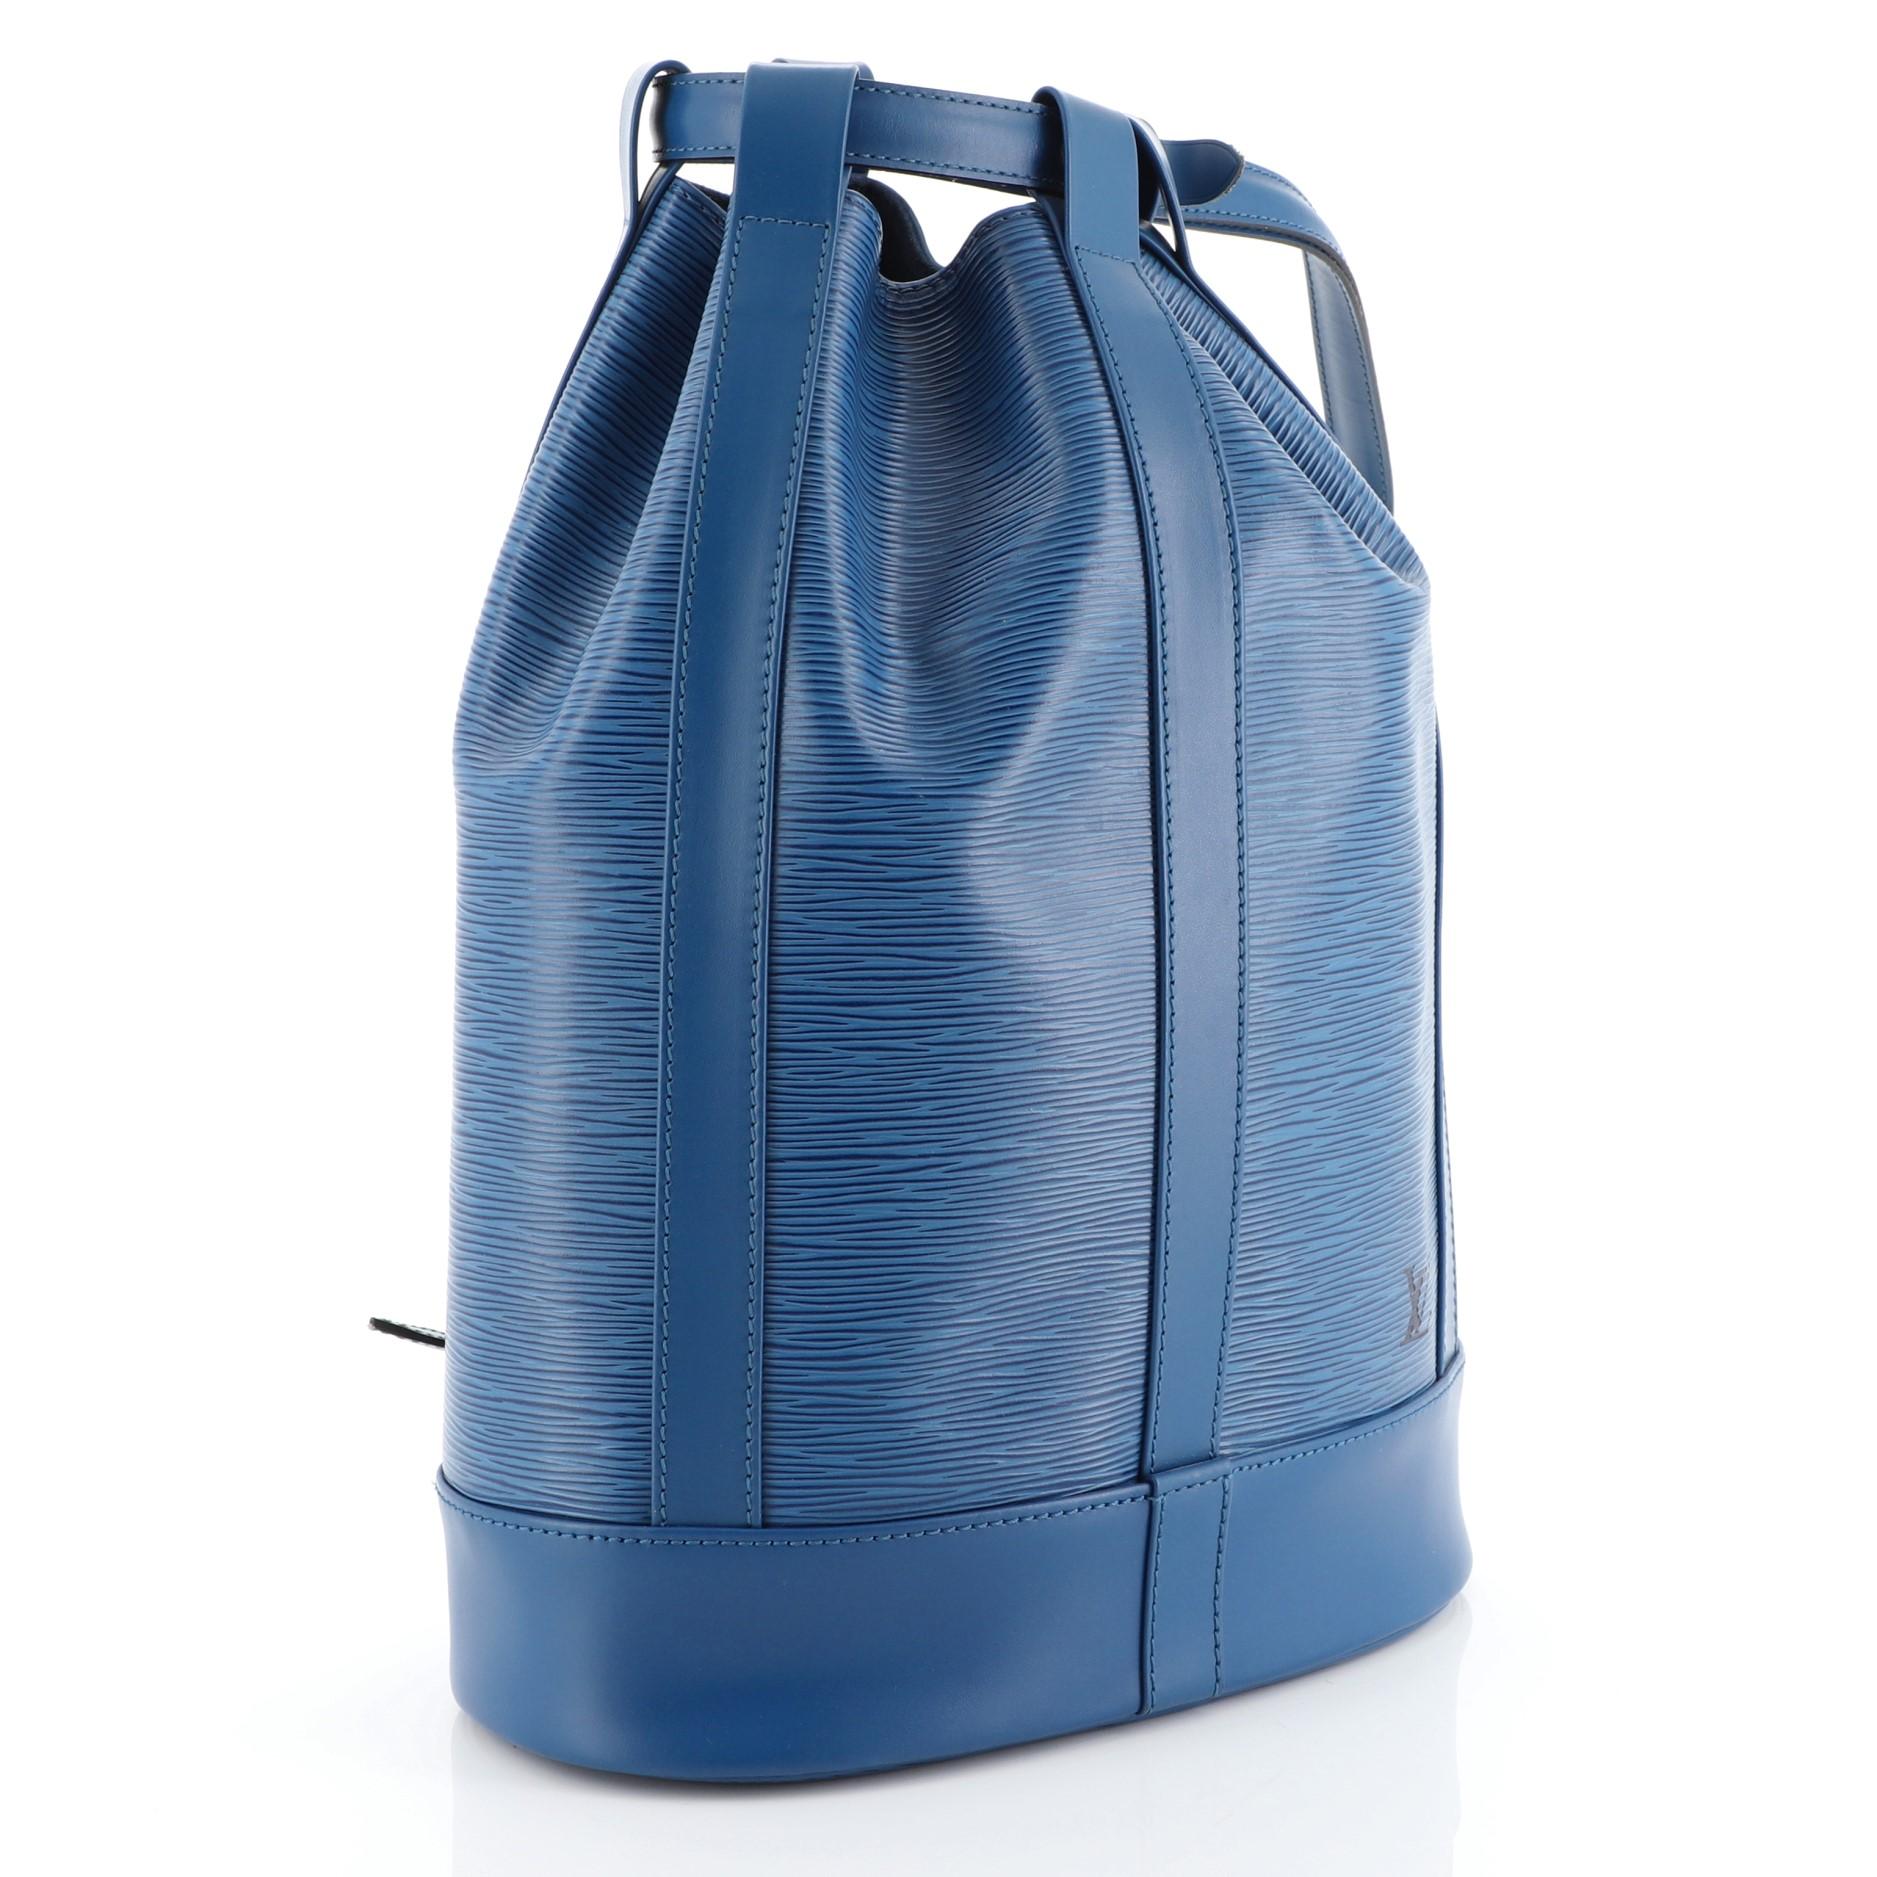 This Louis Vuitton Randonnee Backpack Epi Leather PM, crafted from blue epi leather, features adjustable leather cinch strap, subtle LV logo, and gold-tone hardware. Its cinch strap closure opens to a blue microfiber interior. Authenticity code